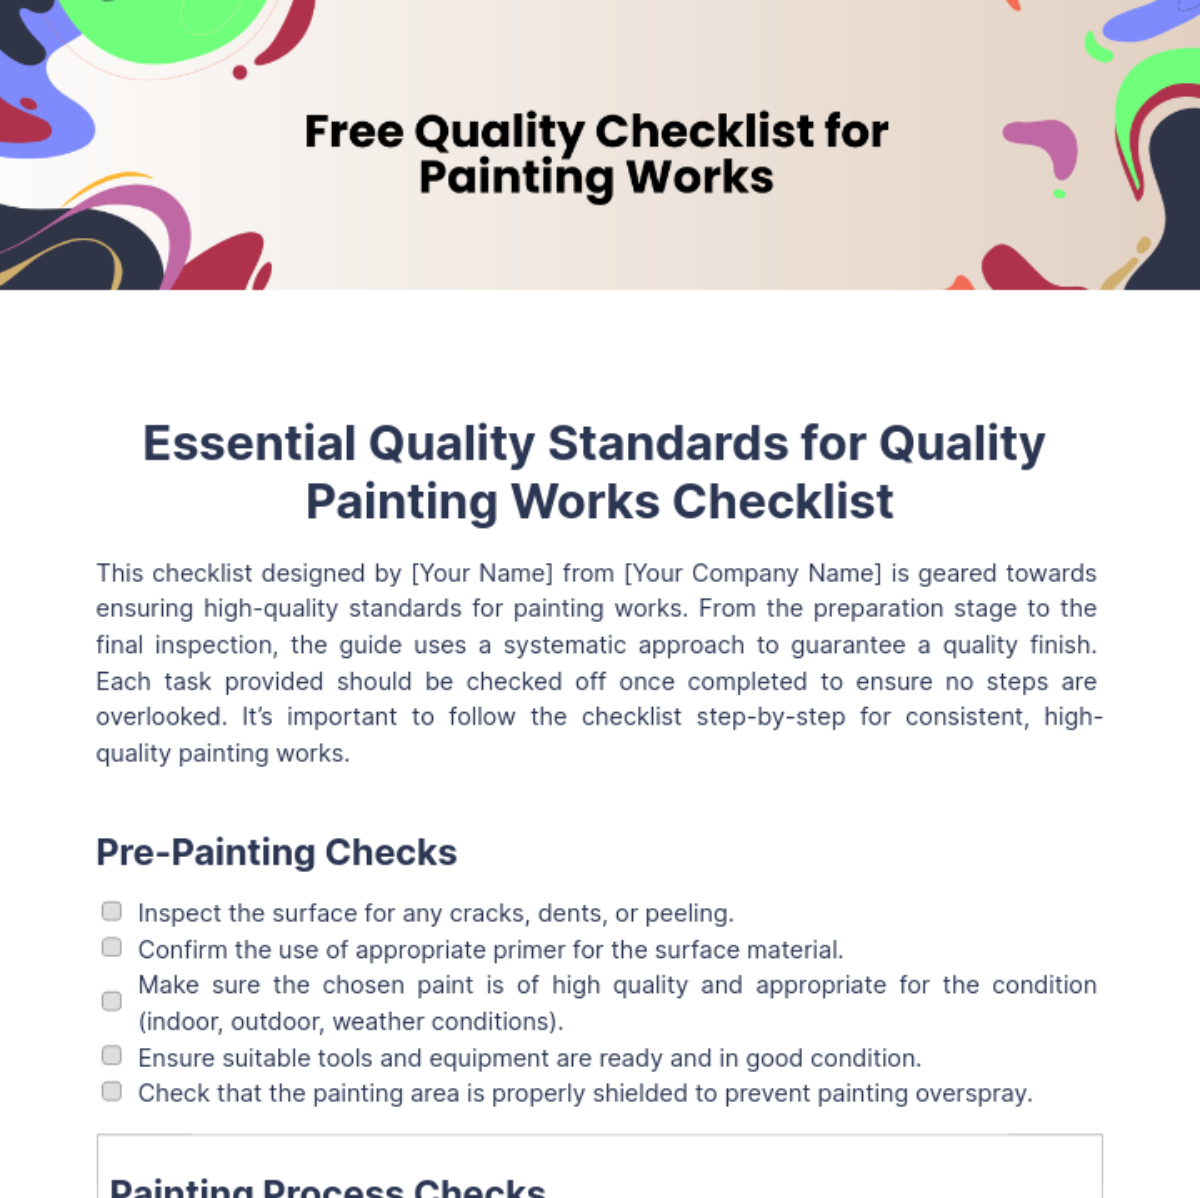 Quality Checklist for Painting Works Template